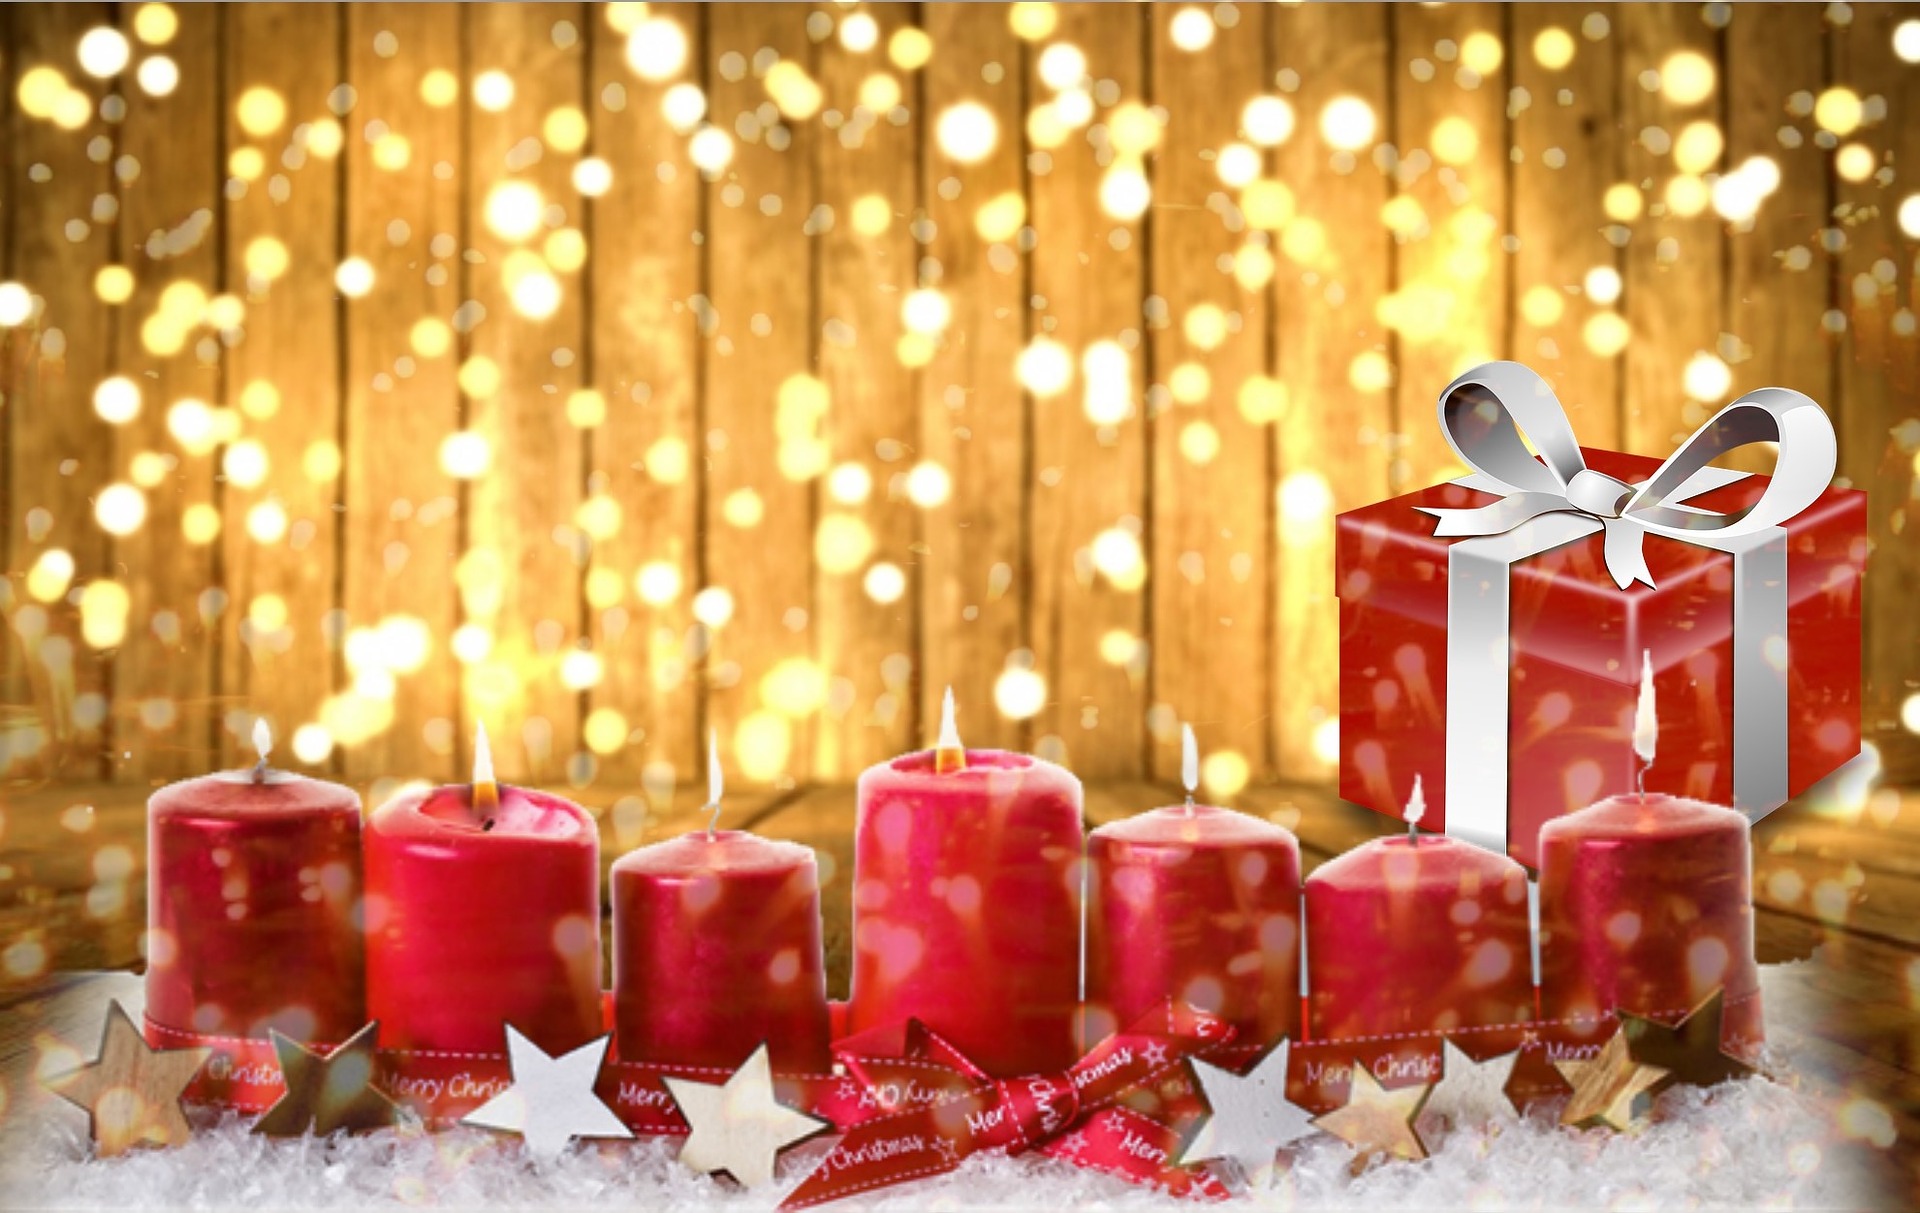 Present with Twinkling Lights: The Gifts I Want to Give